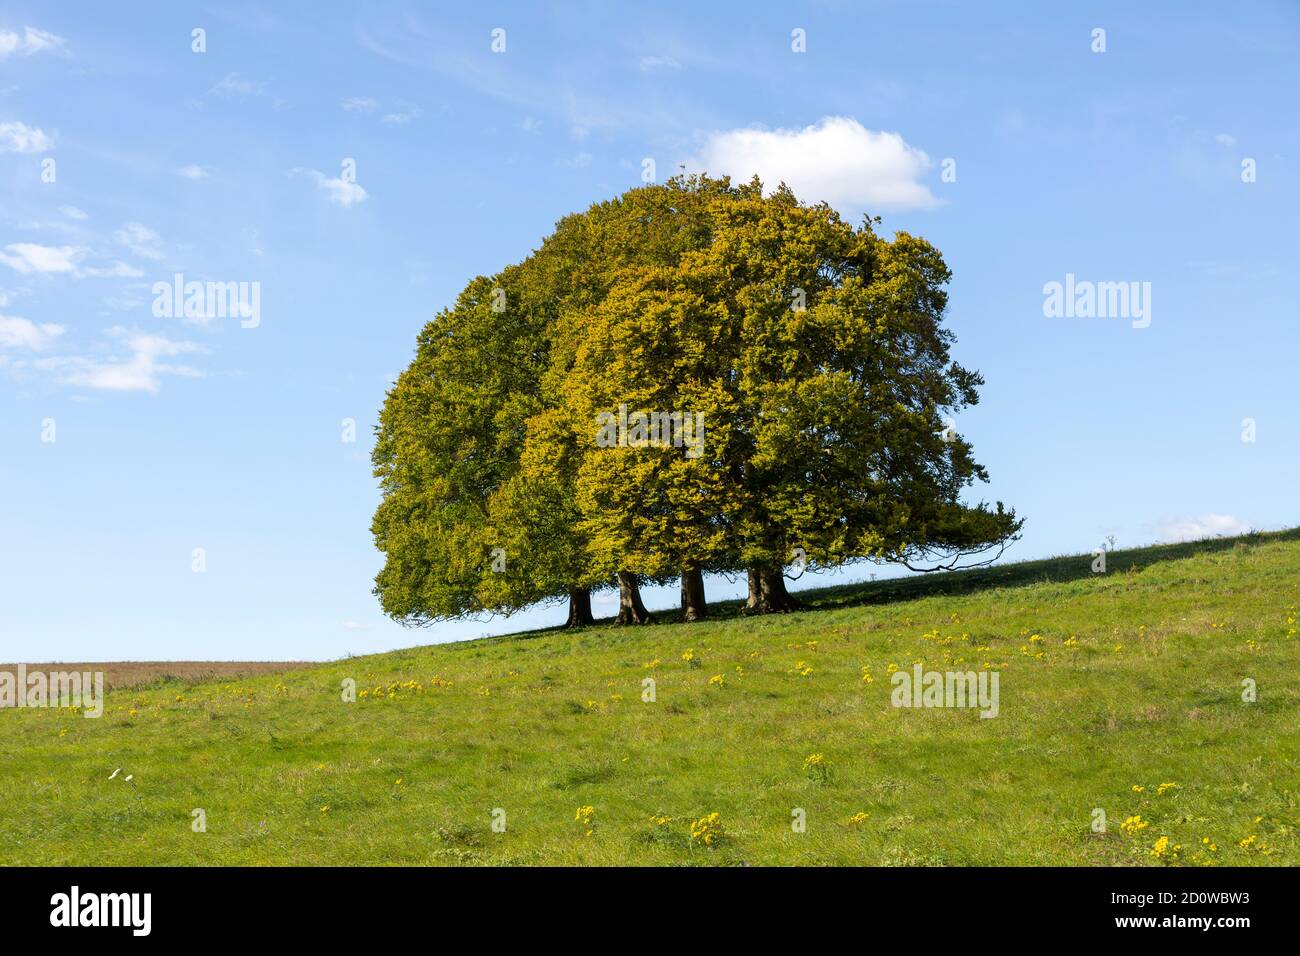 Landscape with clump of common beech trees blue sky on grassy green slope, Salisbury Plain, Wiltshire, England, UK Stock Photo